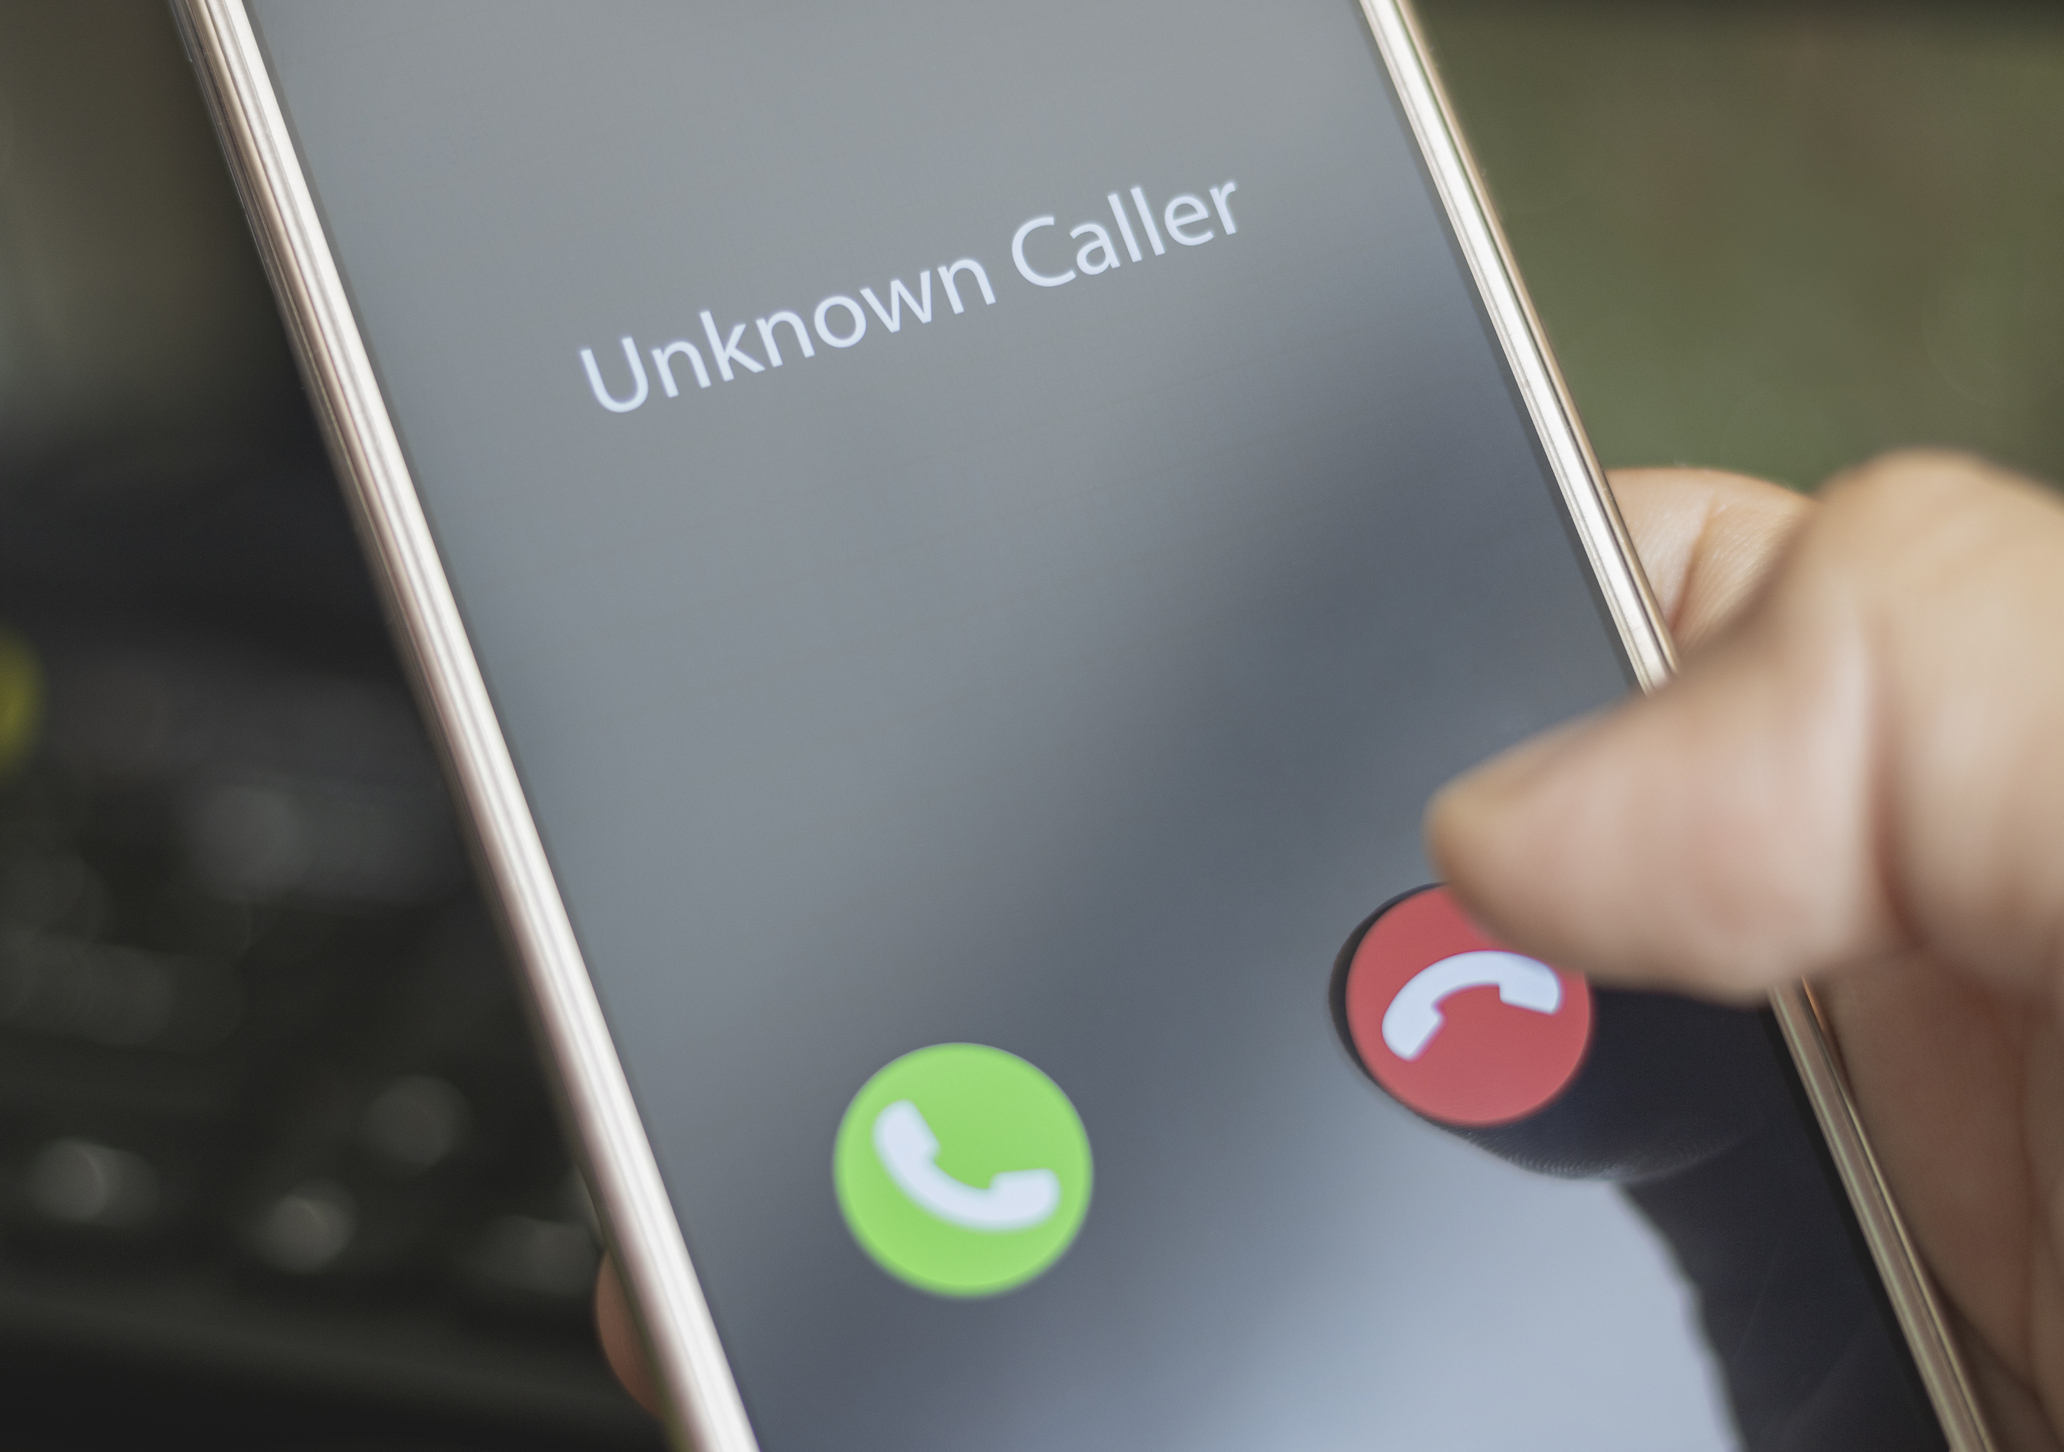 Unknown Caller appearing on a mobile phone screen